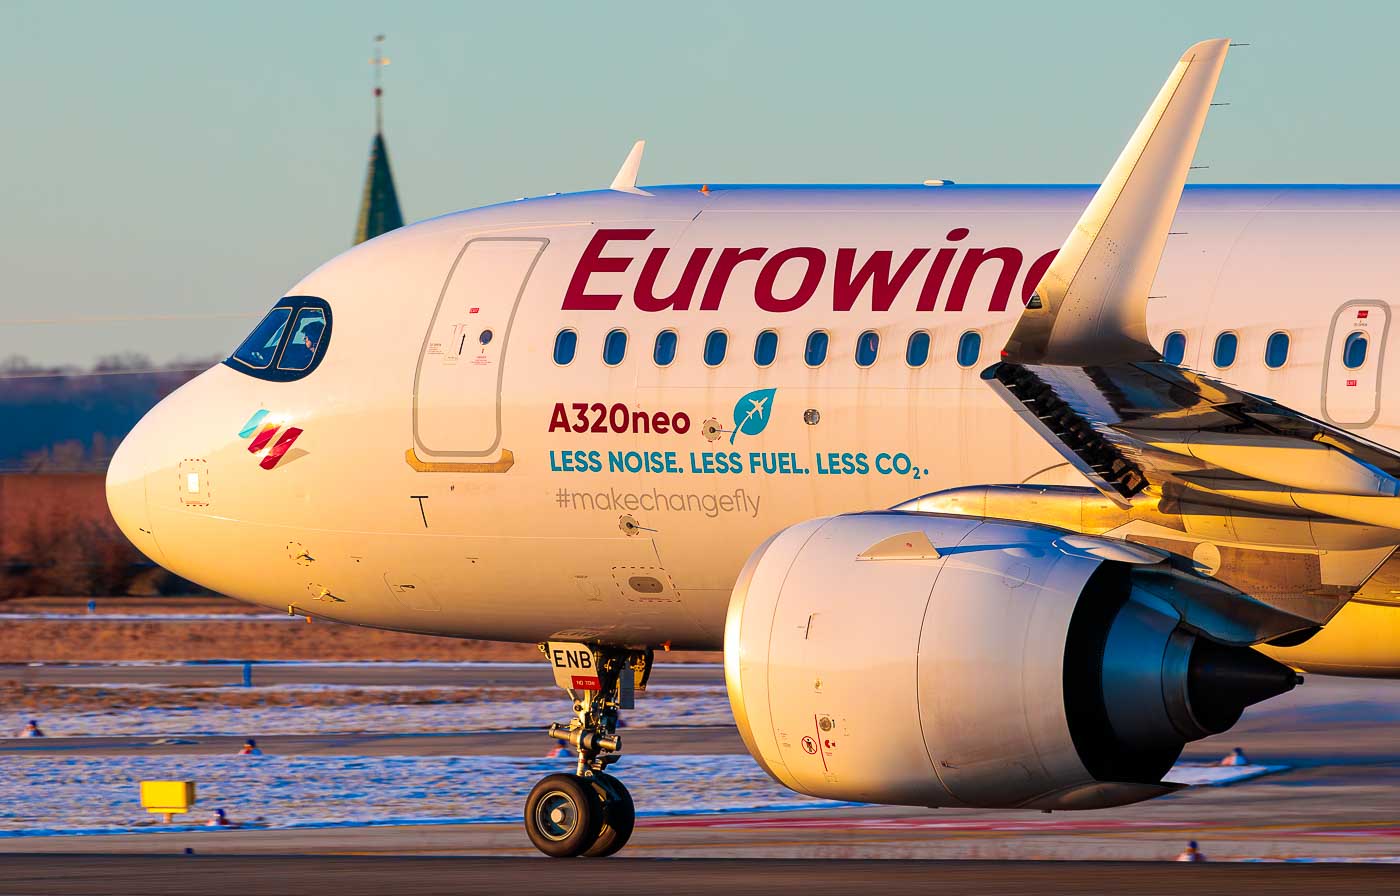 D-AENB - Eurowings Airbus A320neo